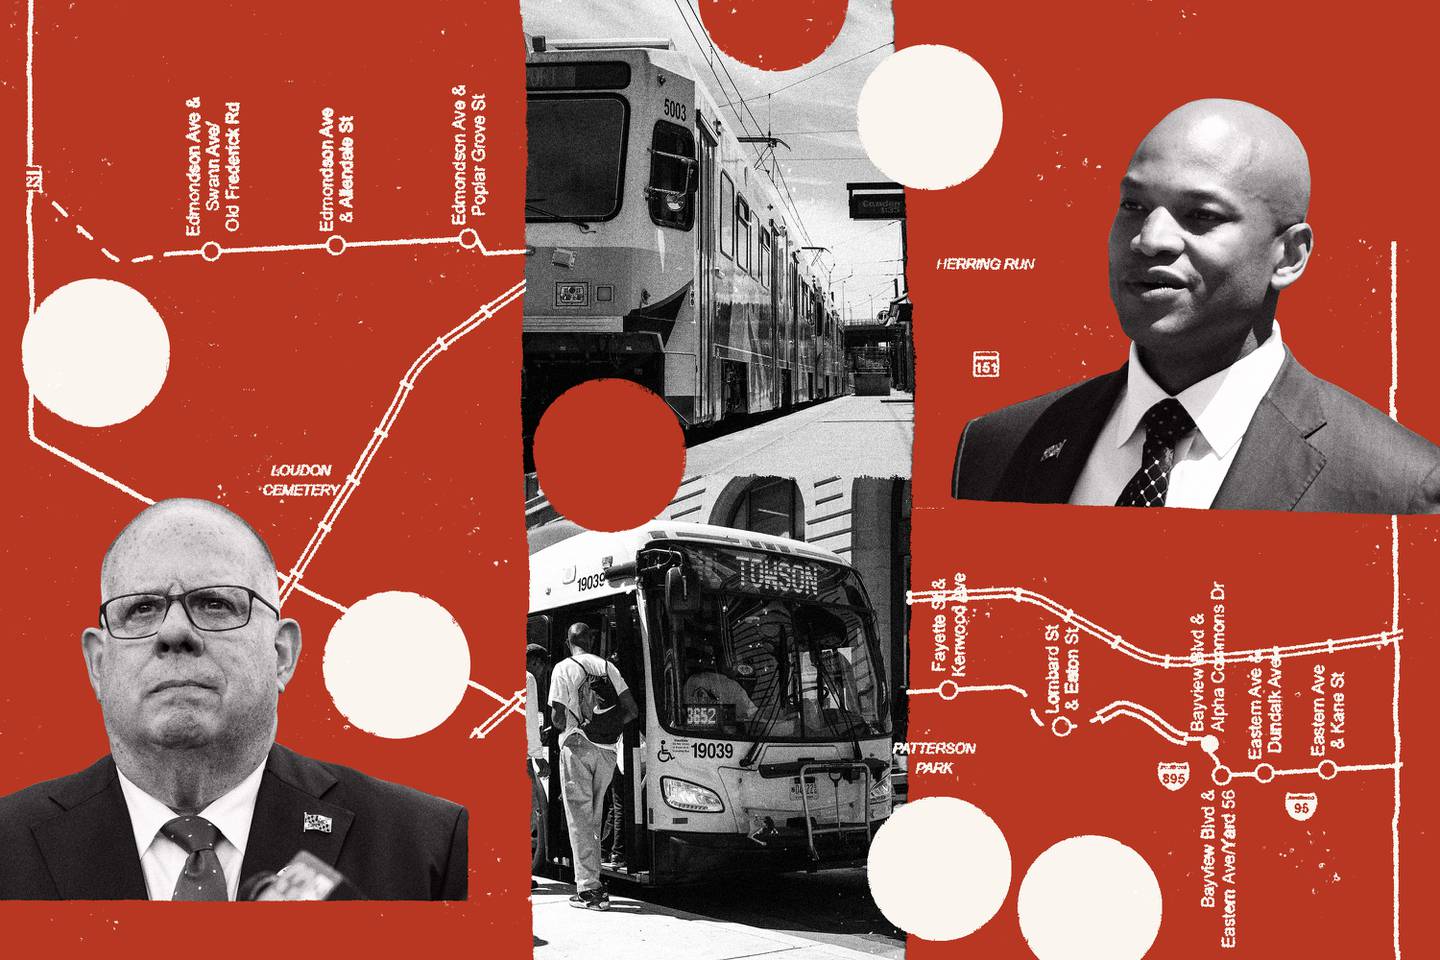 Baltimore transit line map and images of light rail, bus, Governor Hogan, Wes Moore